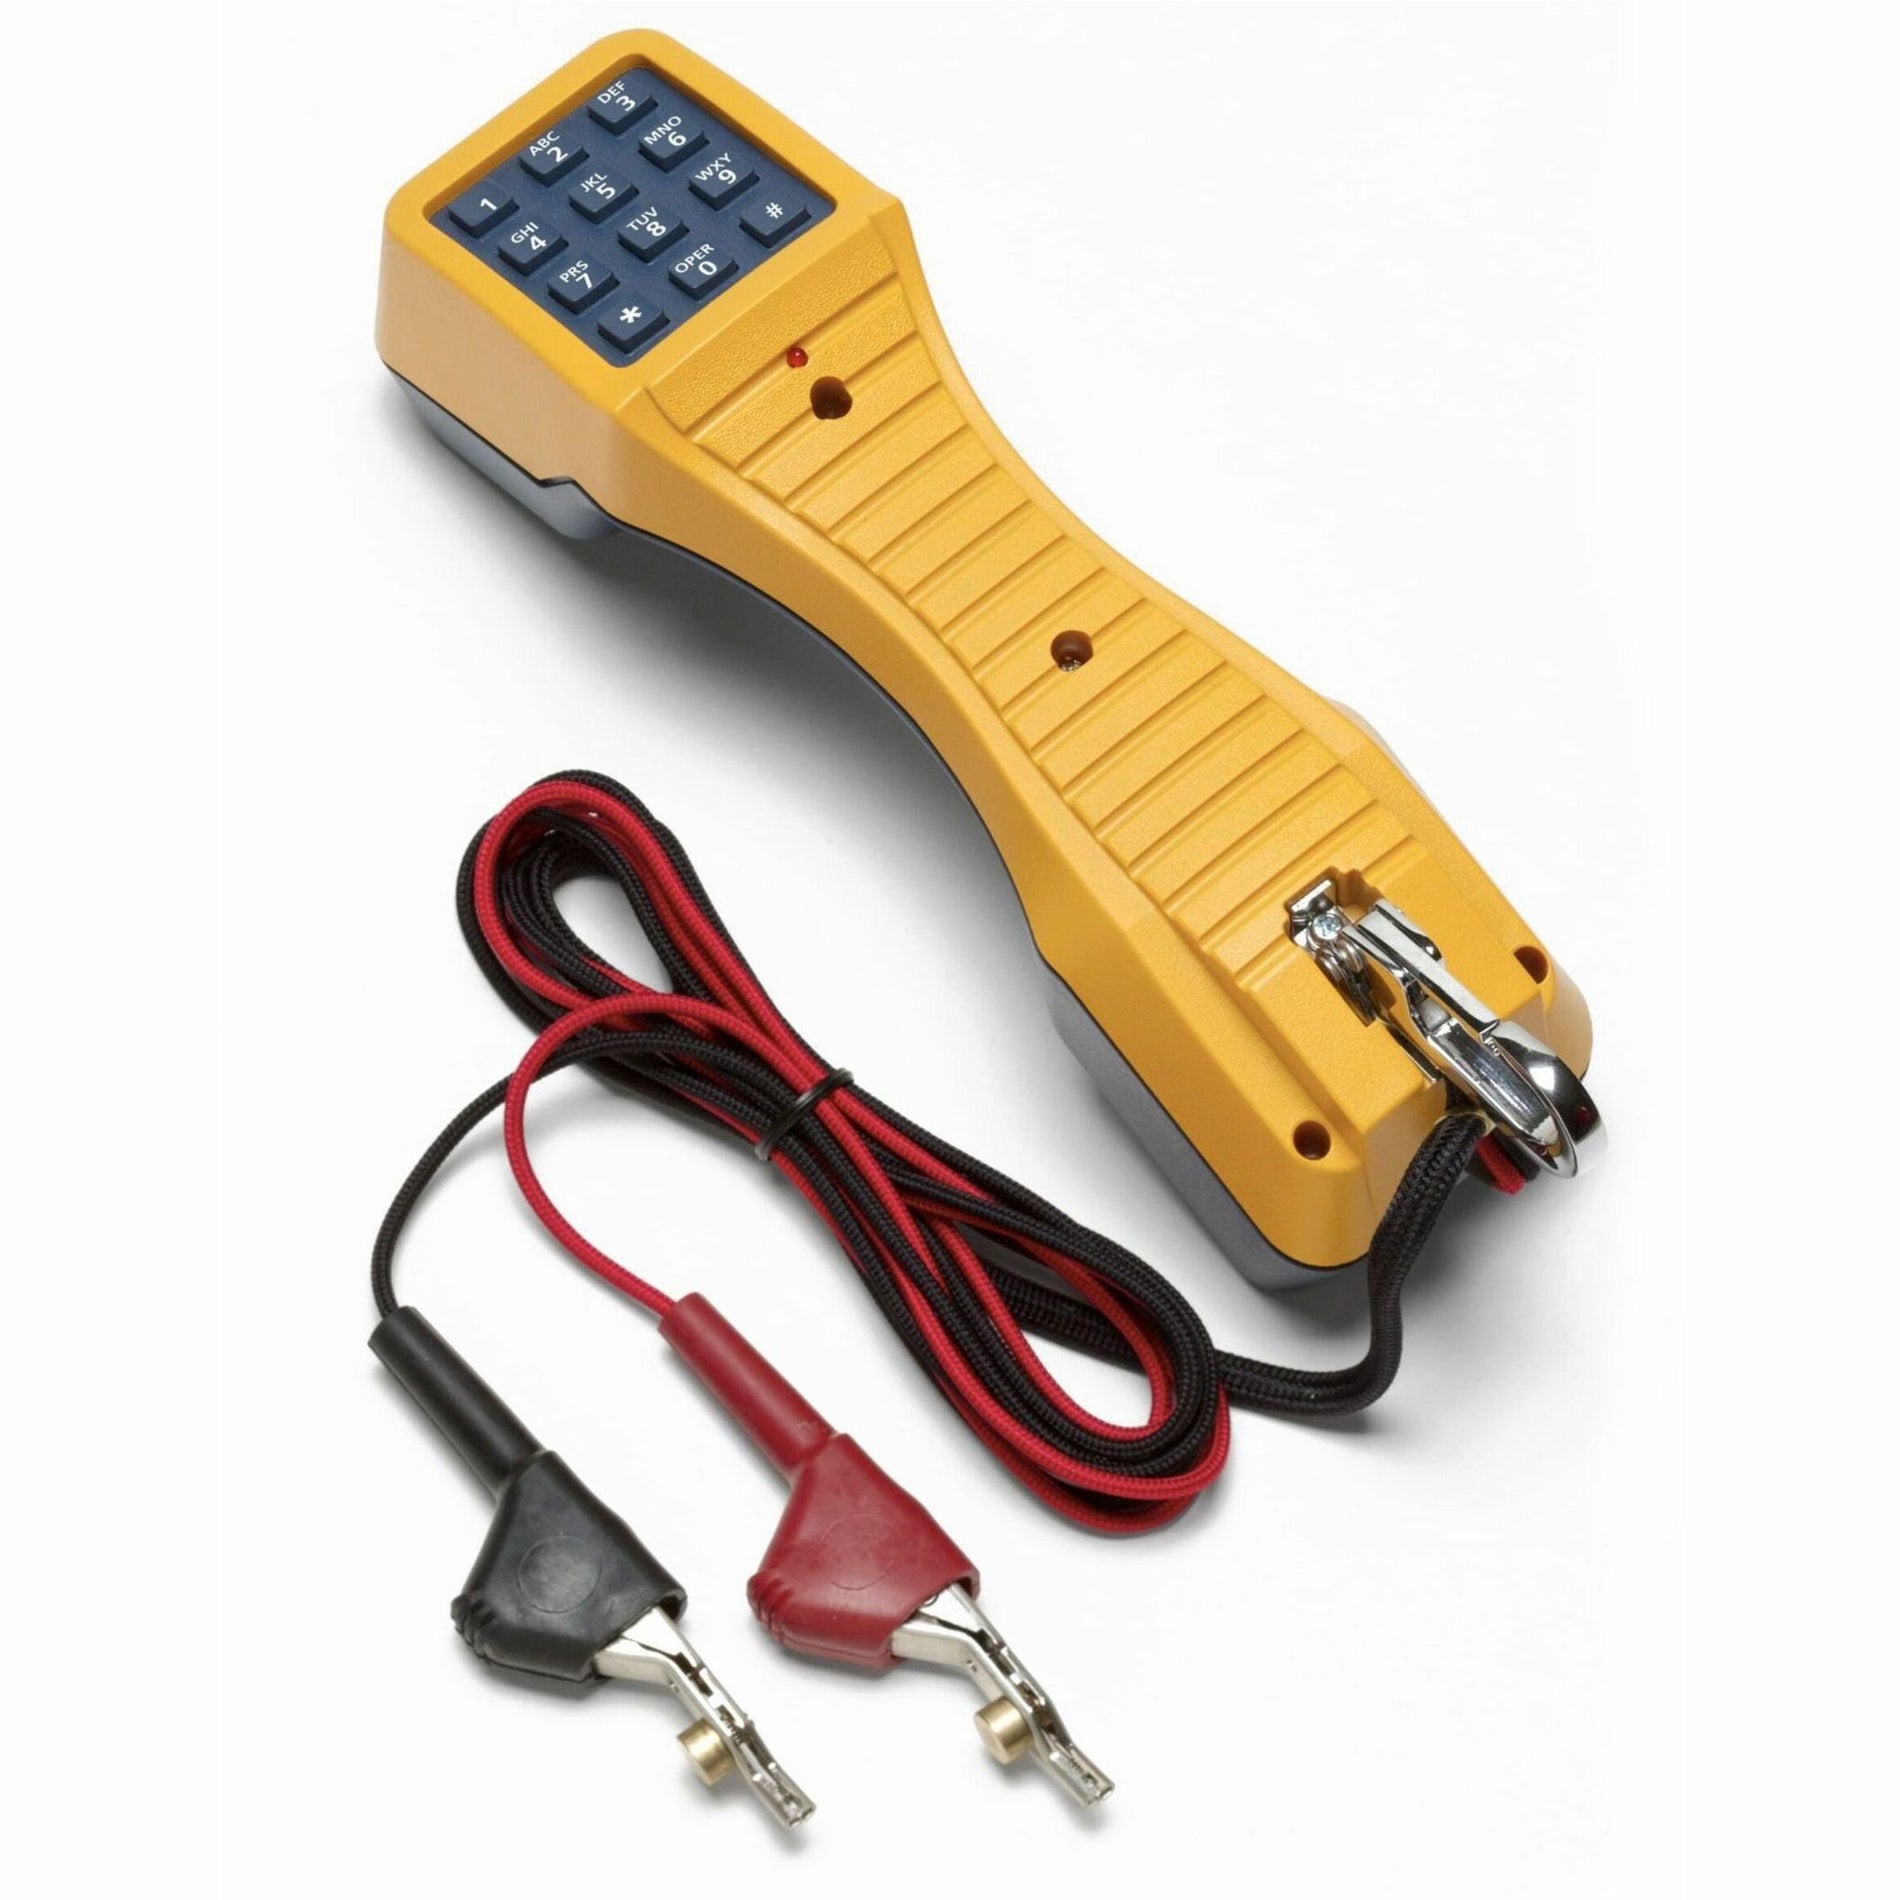 Fluke Networks 19800009 TS19 Test Set, Network Monitoring Device for Short Circuit and Open Circuit Testing